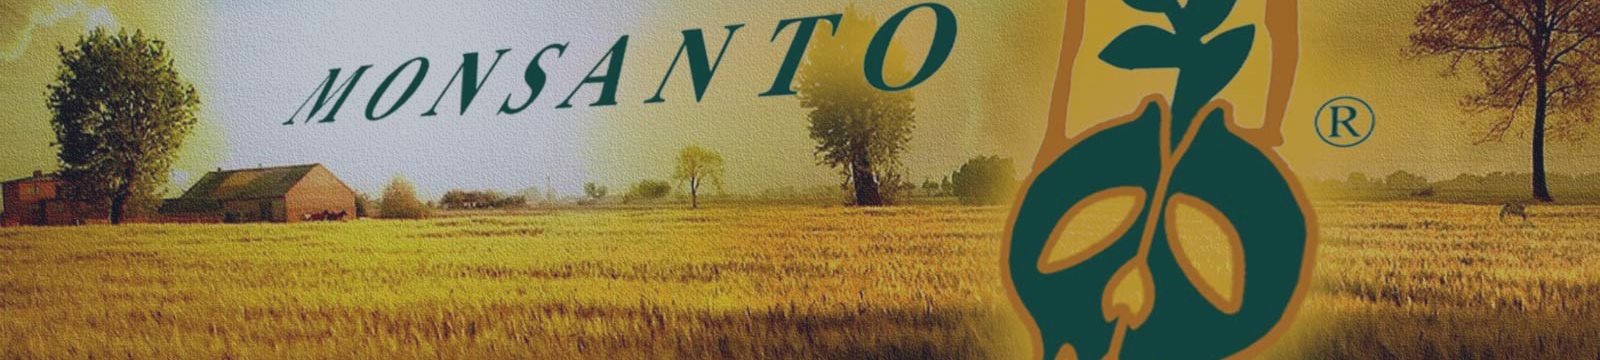 Monsanto Co. (MON), the world’s largest seed company, going to sell $4.5 billion of bonds to fund share repurchases